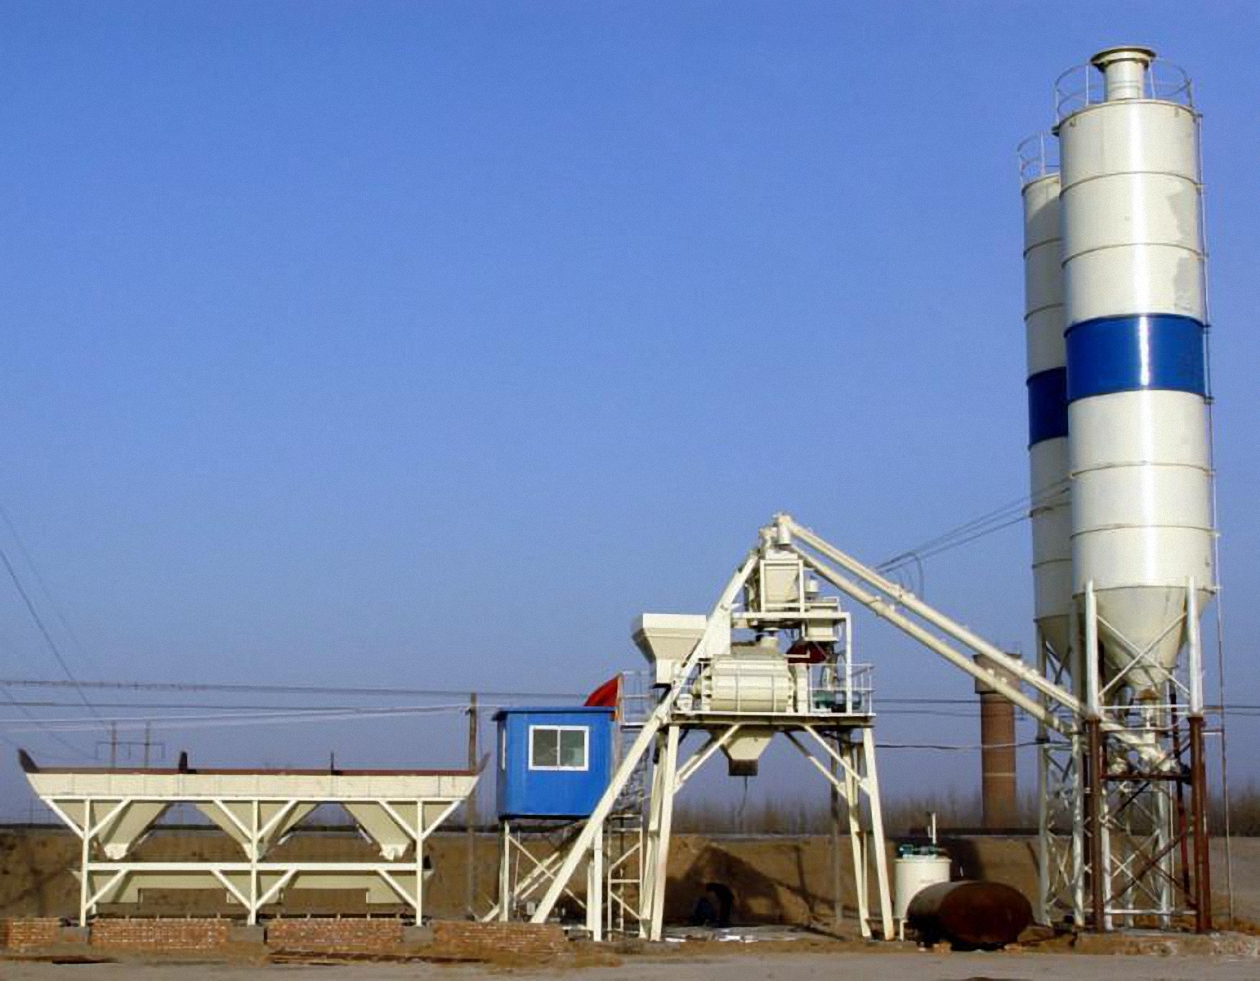 concrete batching plant manufacturers in malaysia 